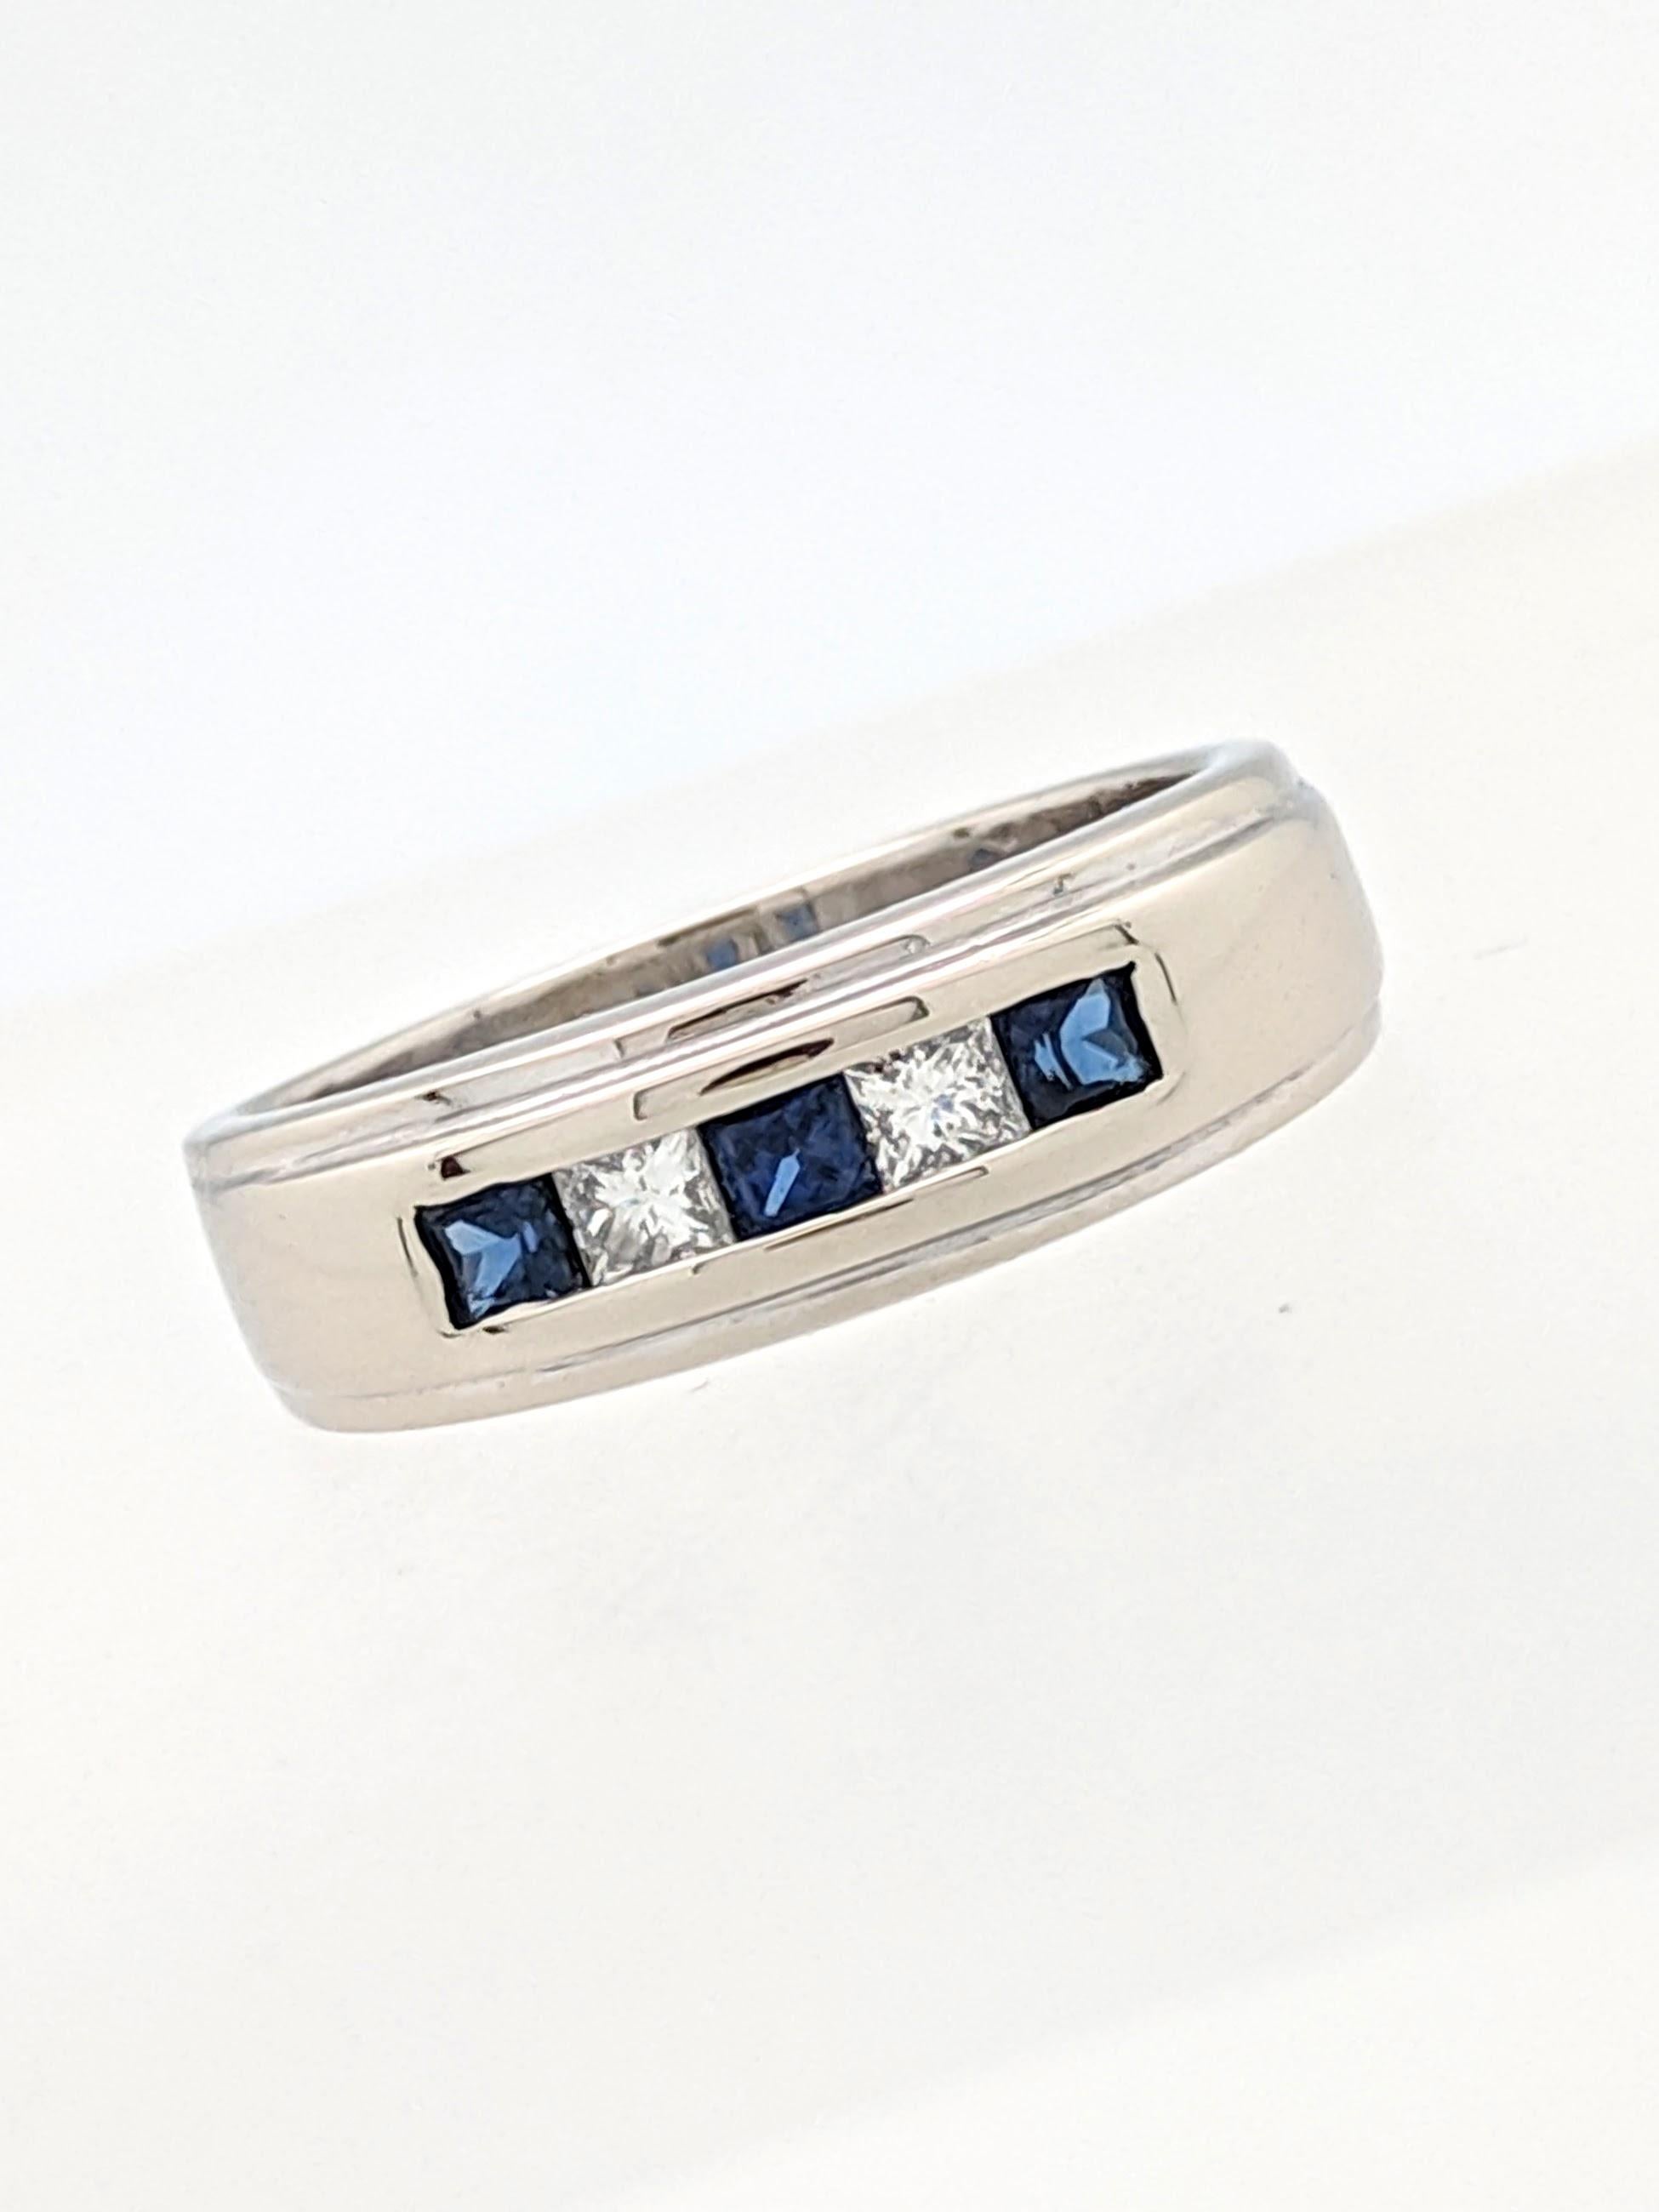 14k White Gold Men's 6mm Sapphire & Diamond Wedding Band 

You are viewing a Beautiful Men's Sapphire & Diamond Wedding Band.

This band is crafted from 14 white gold, measures 6mm in width and weighs 7.2 grams. It features (3) .10ct natural